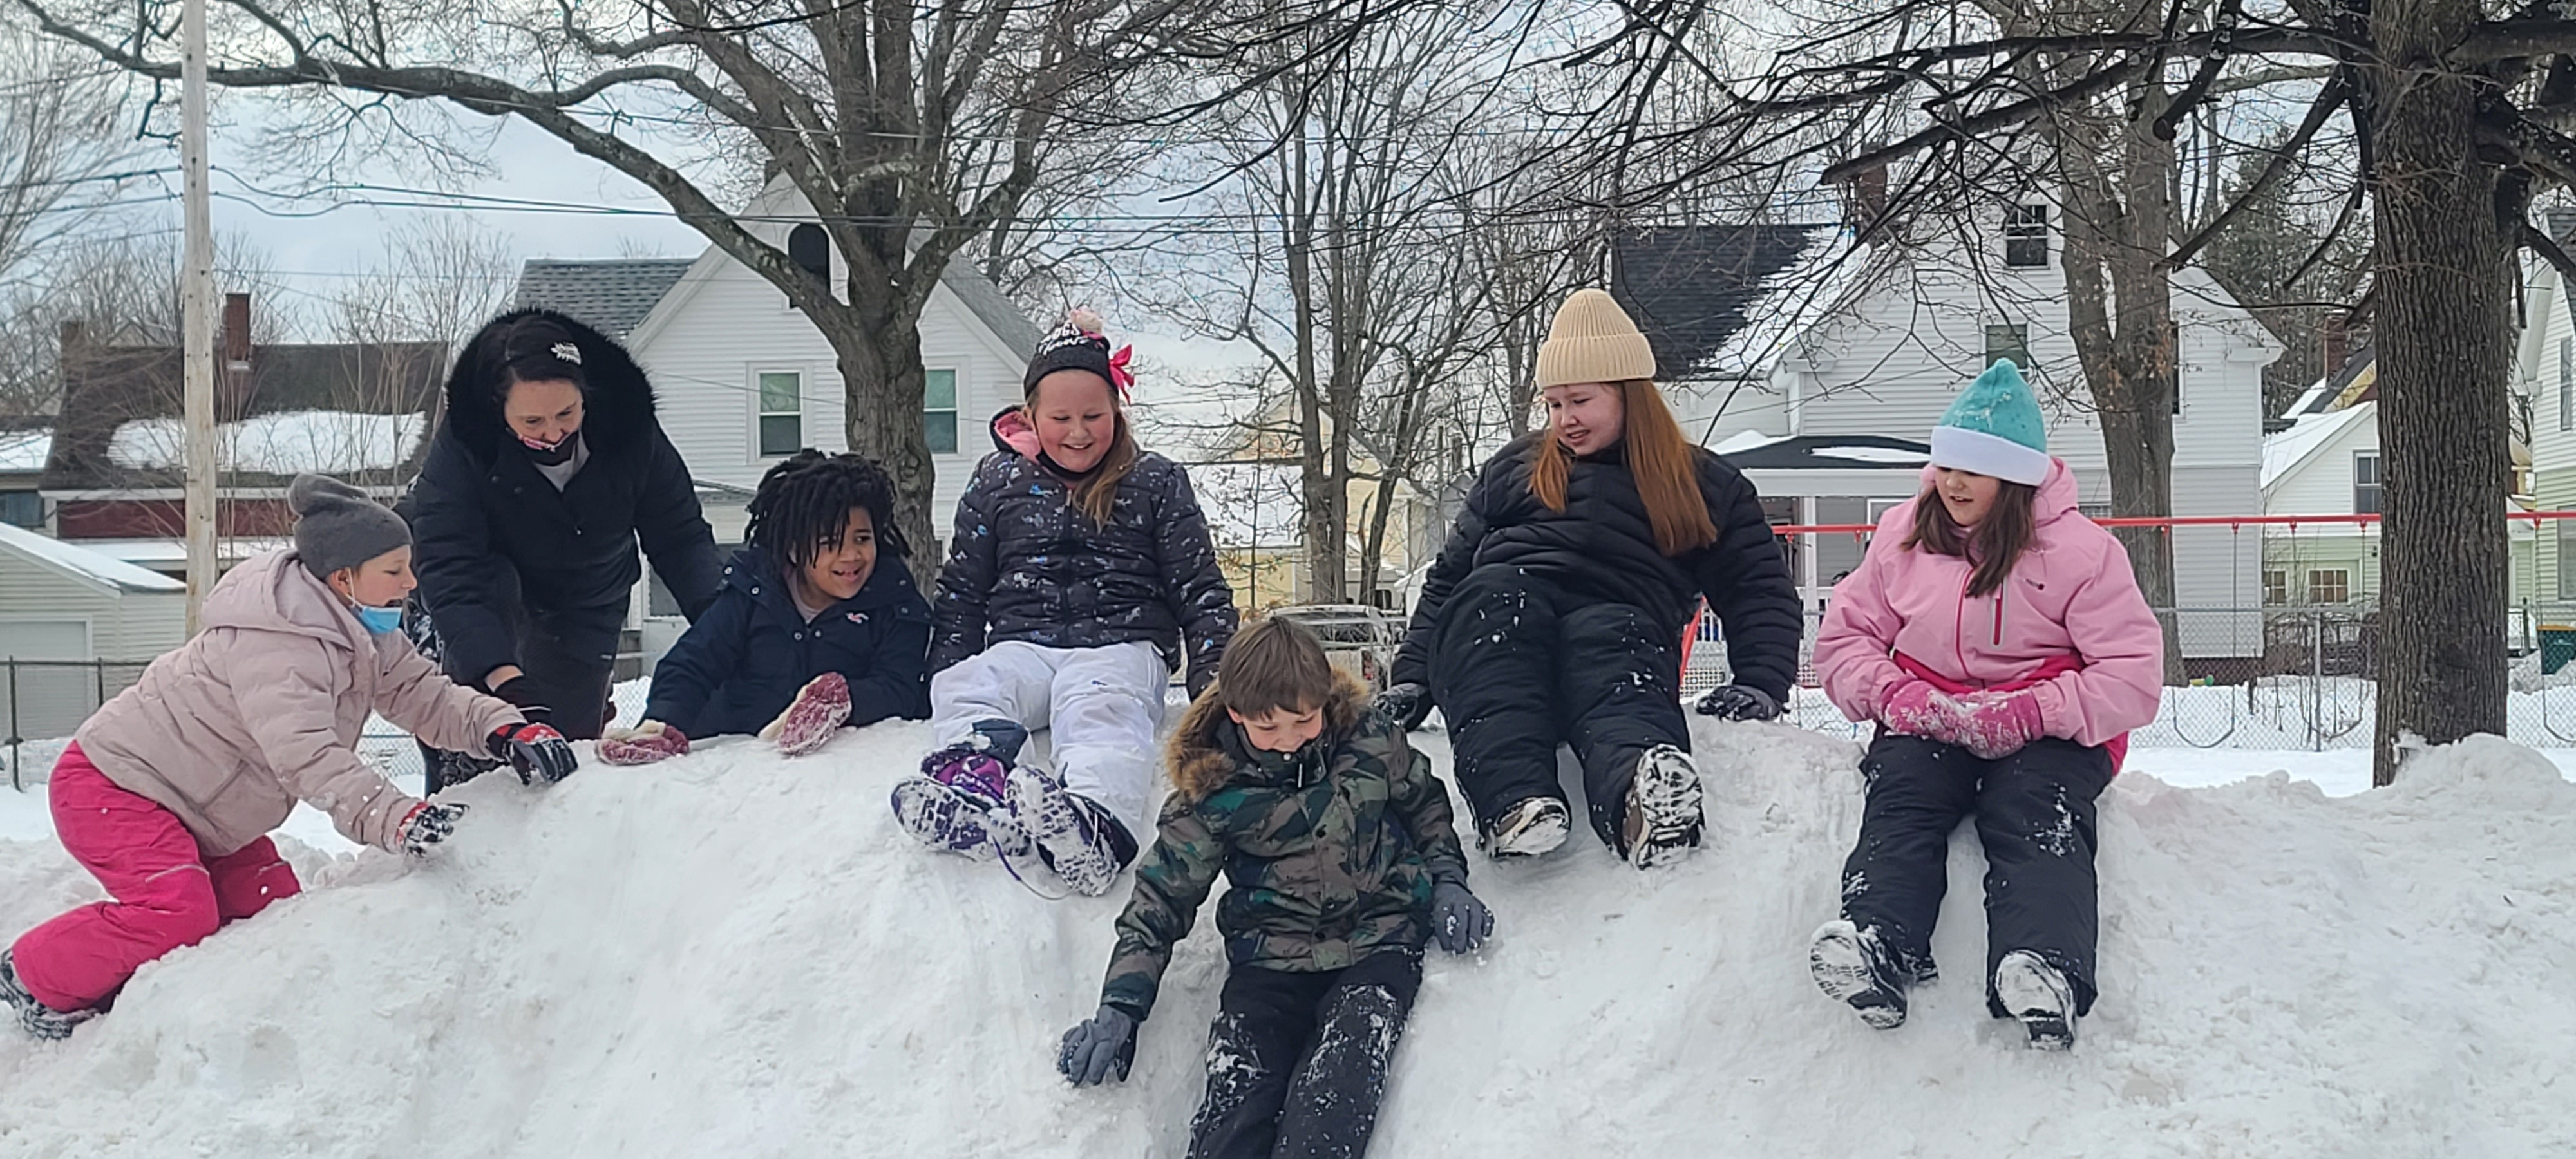 Grade 3 students in the snow